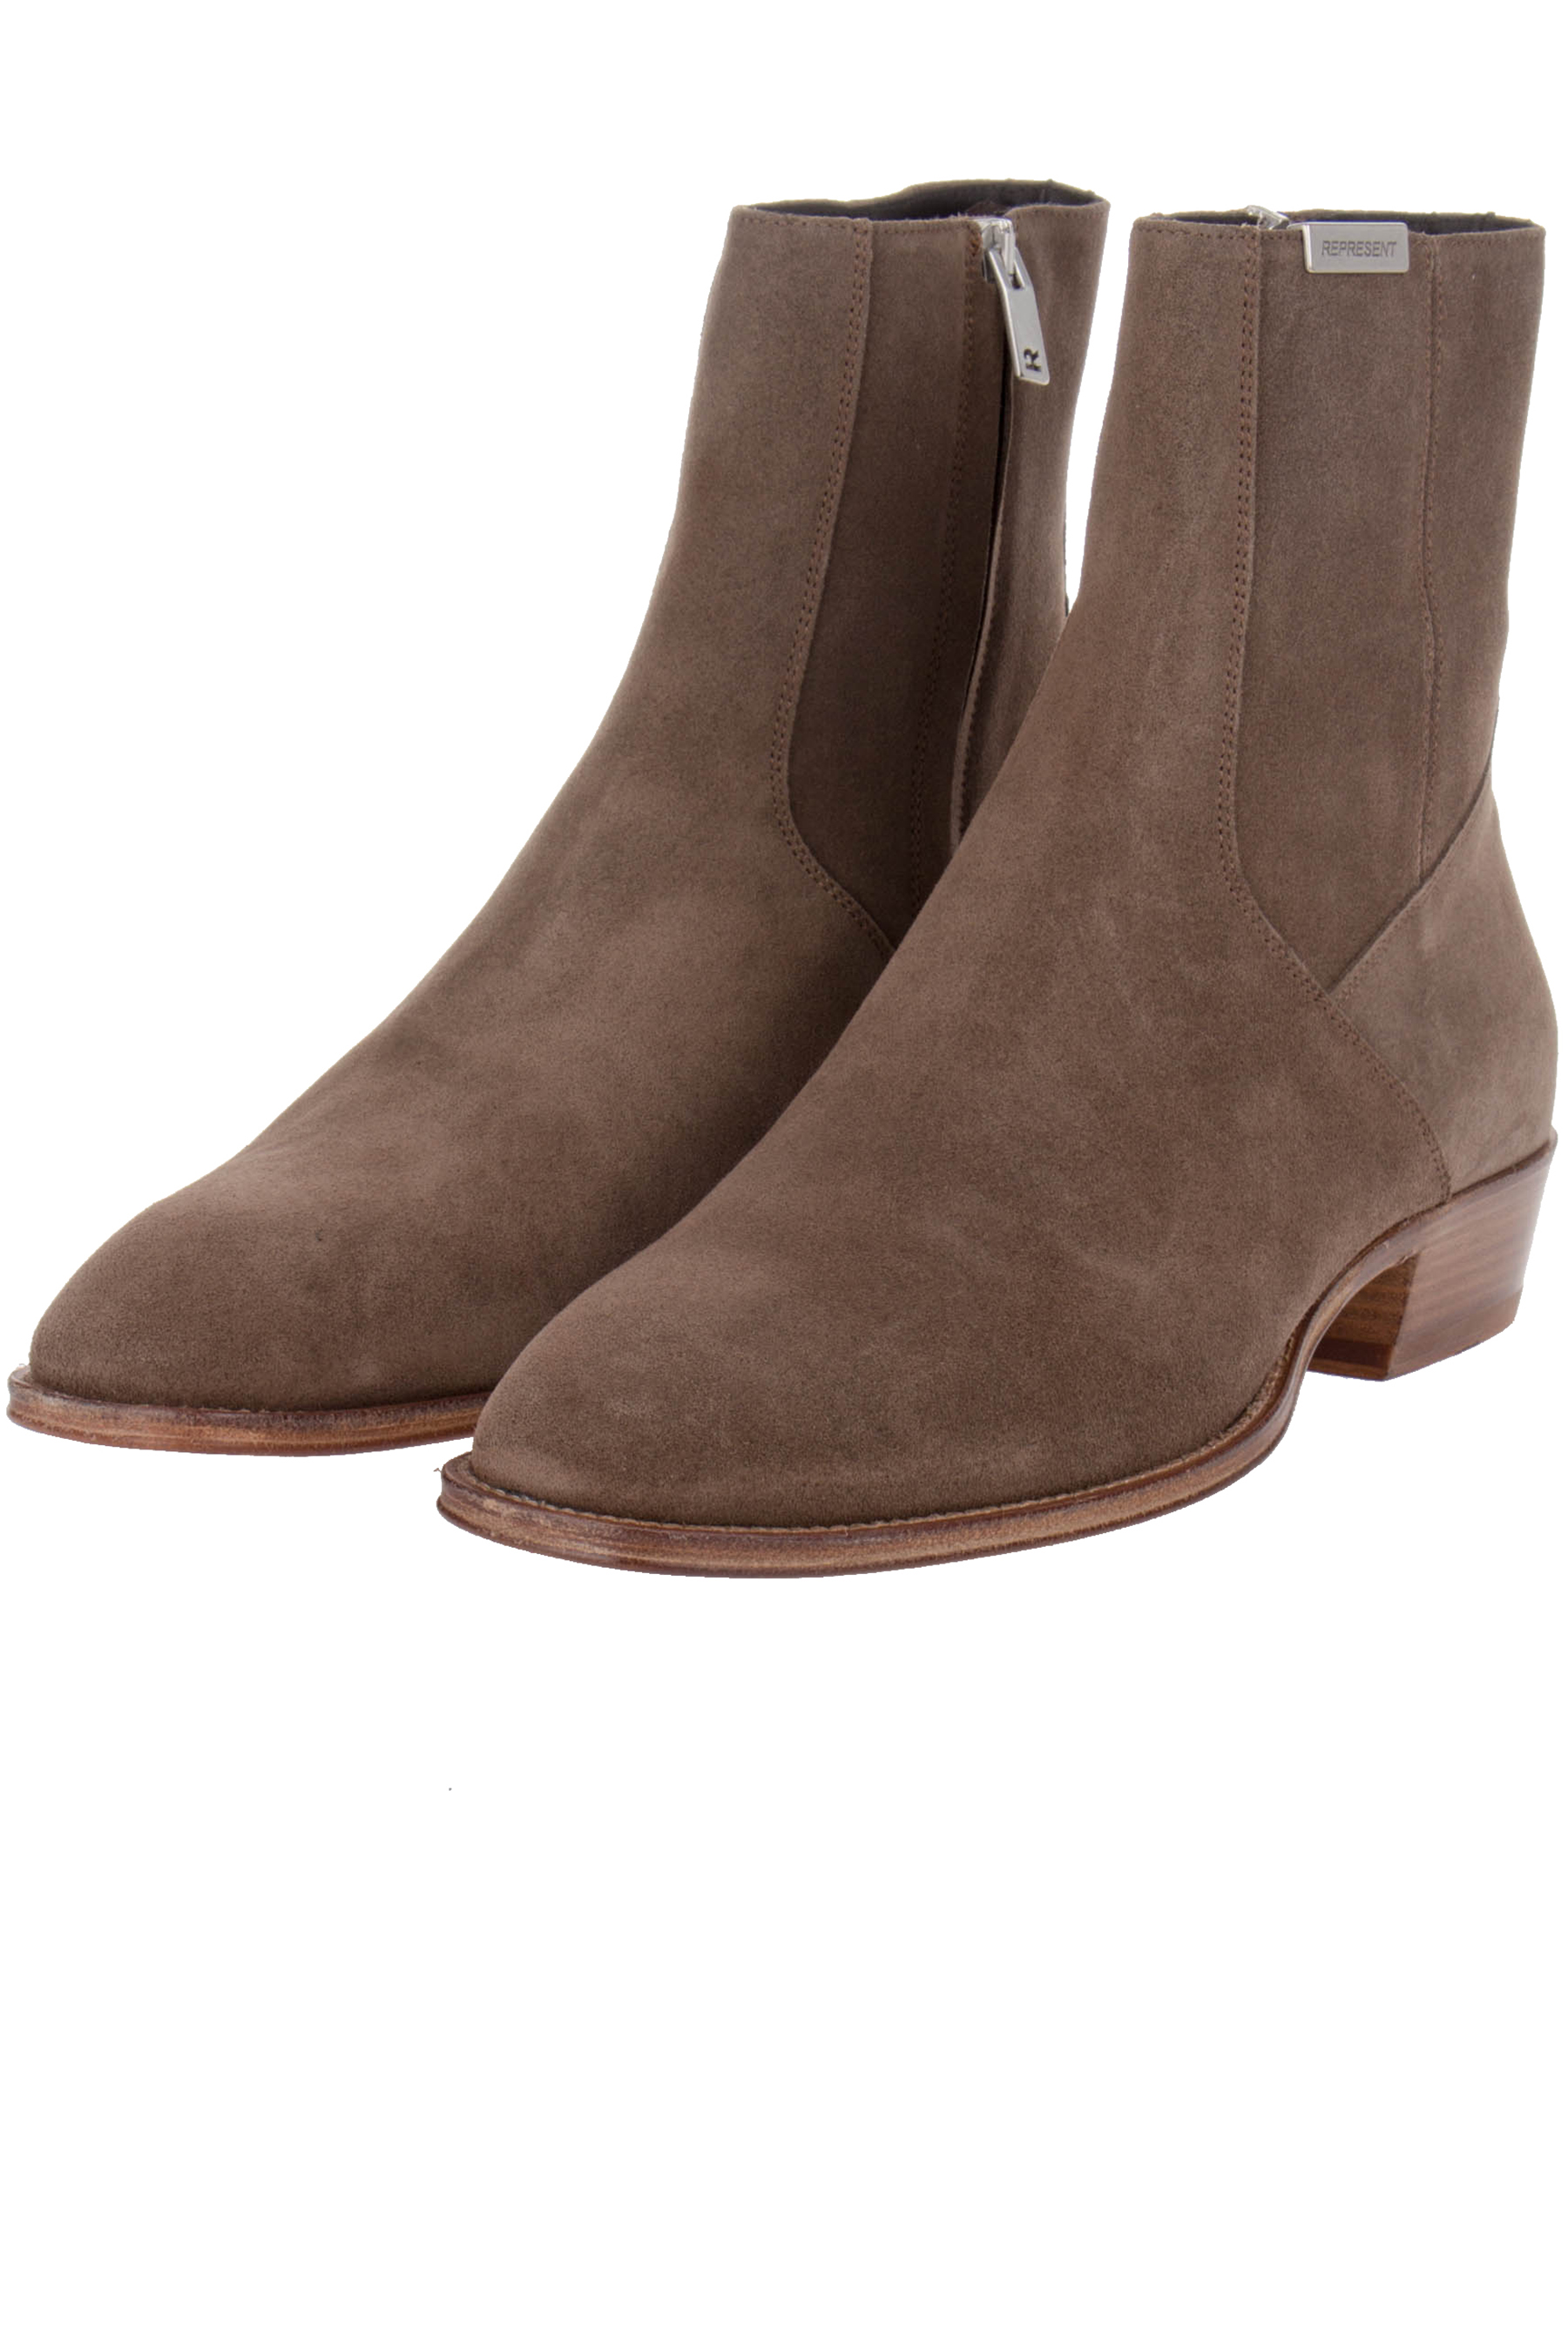 REPRESENT Chelsea Boots | Boots | Shoes 